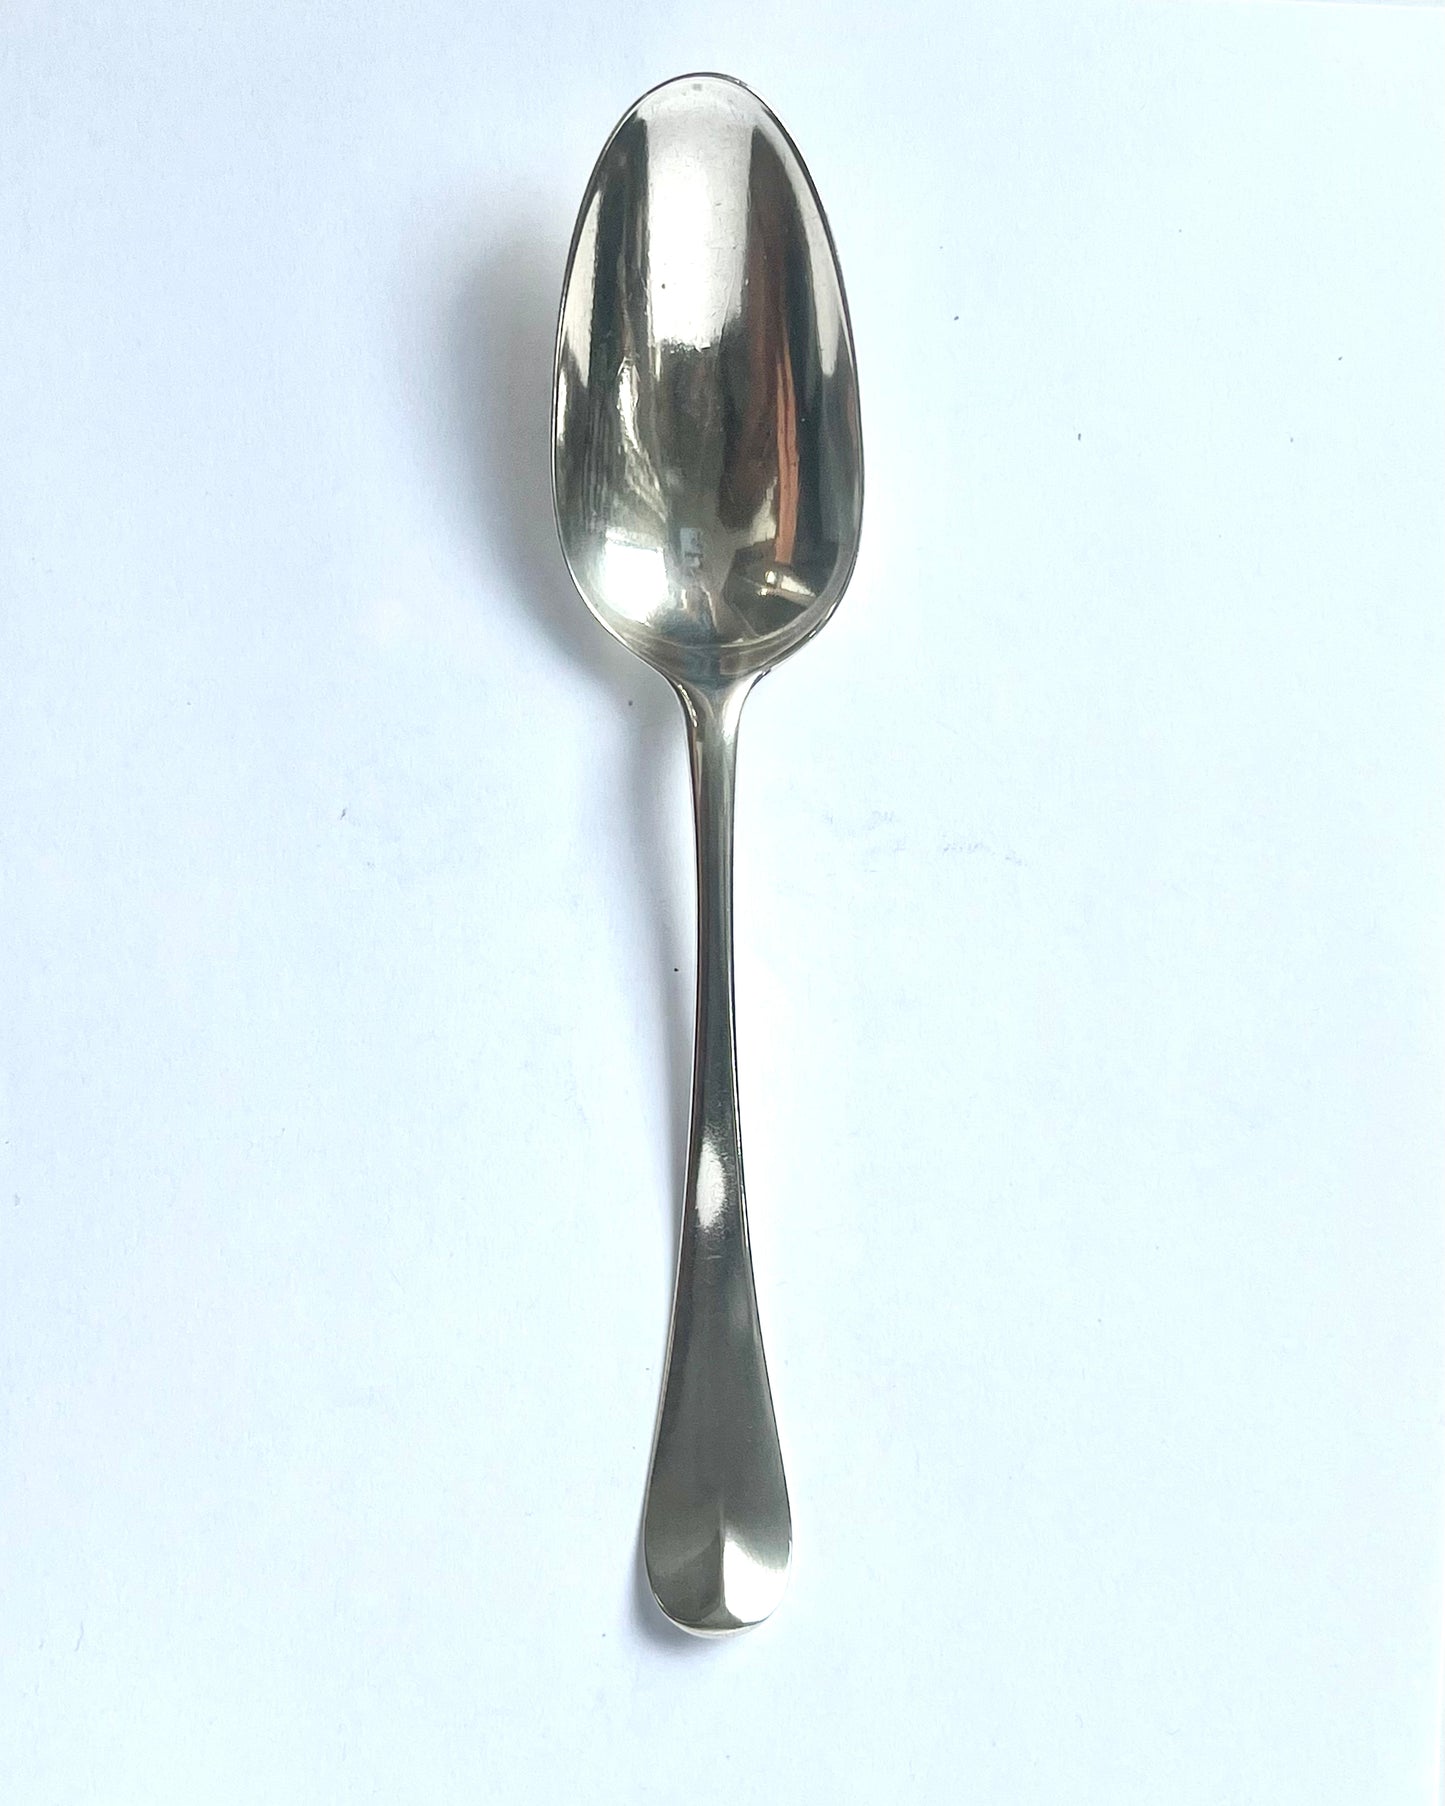 Antique George II sterling silver tablespoon, with marks for James Wilks, London, 1746